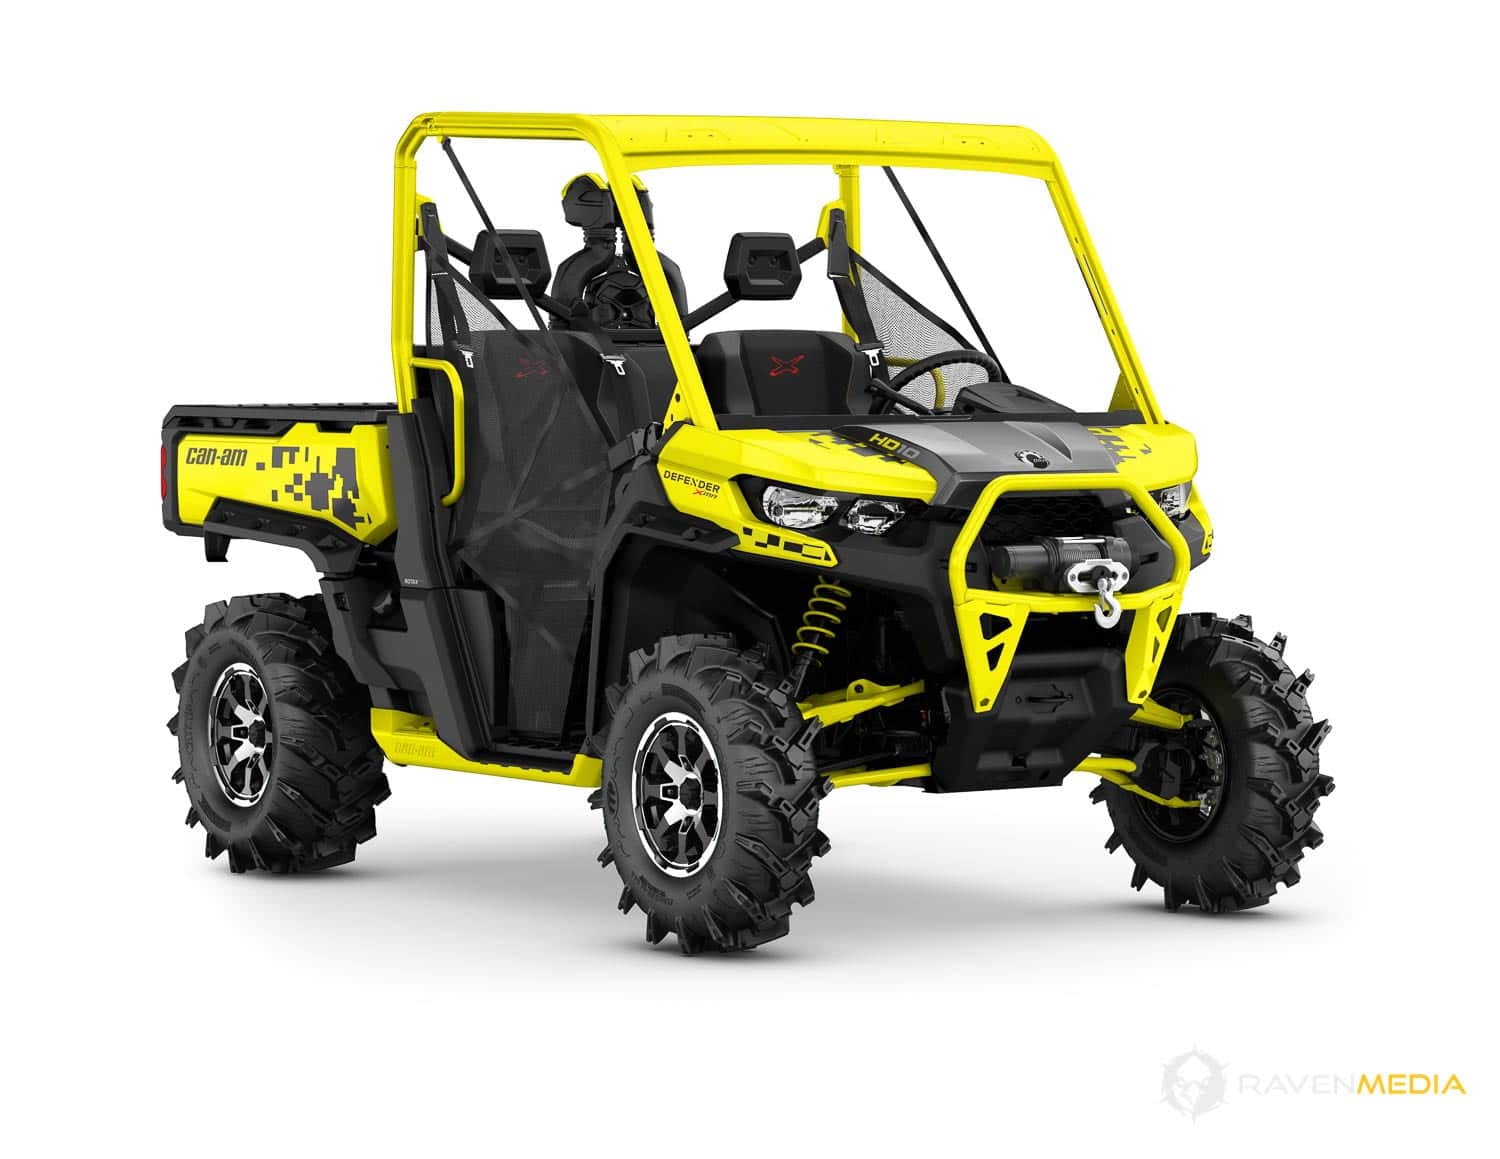 2019 Can-Am Off-Road - What's New